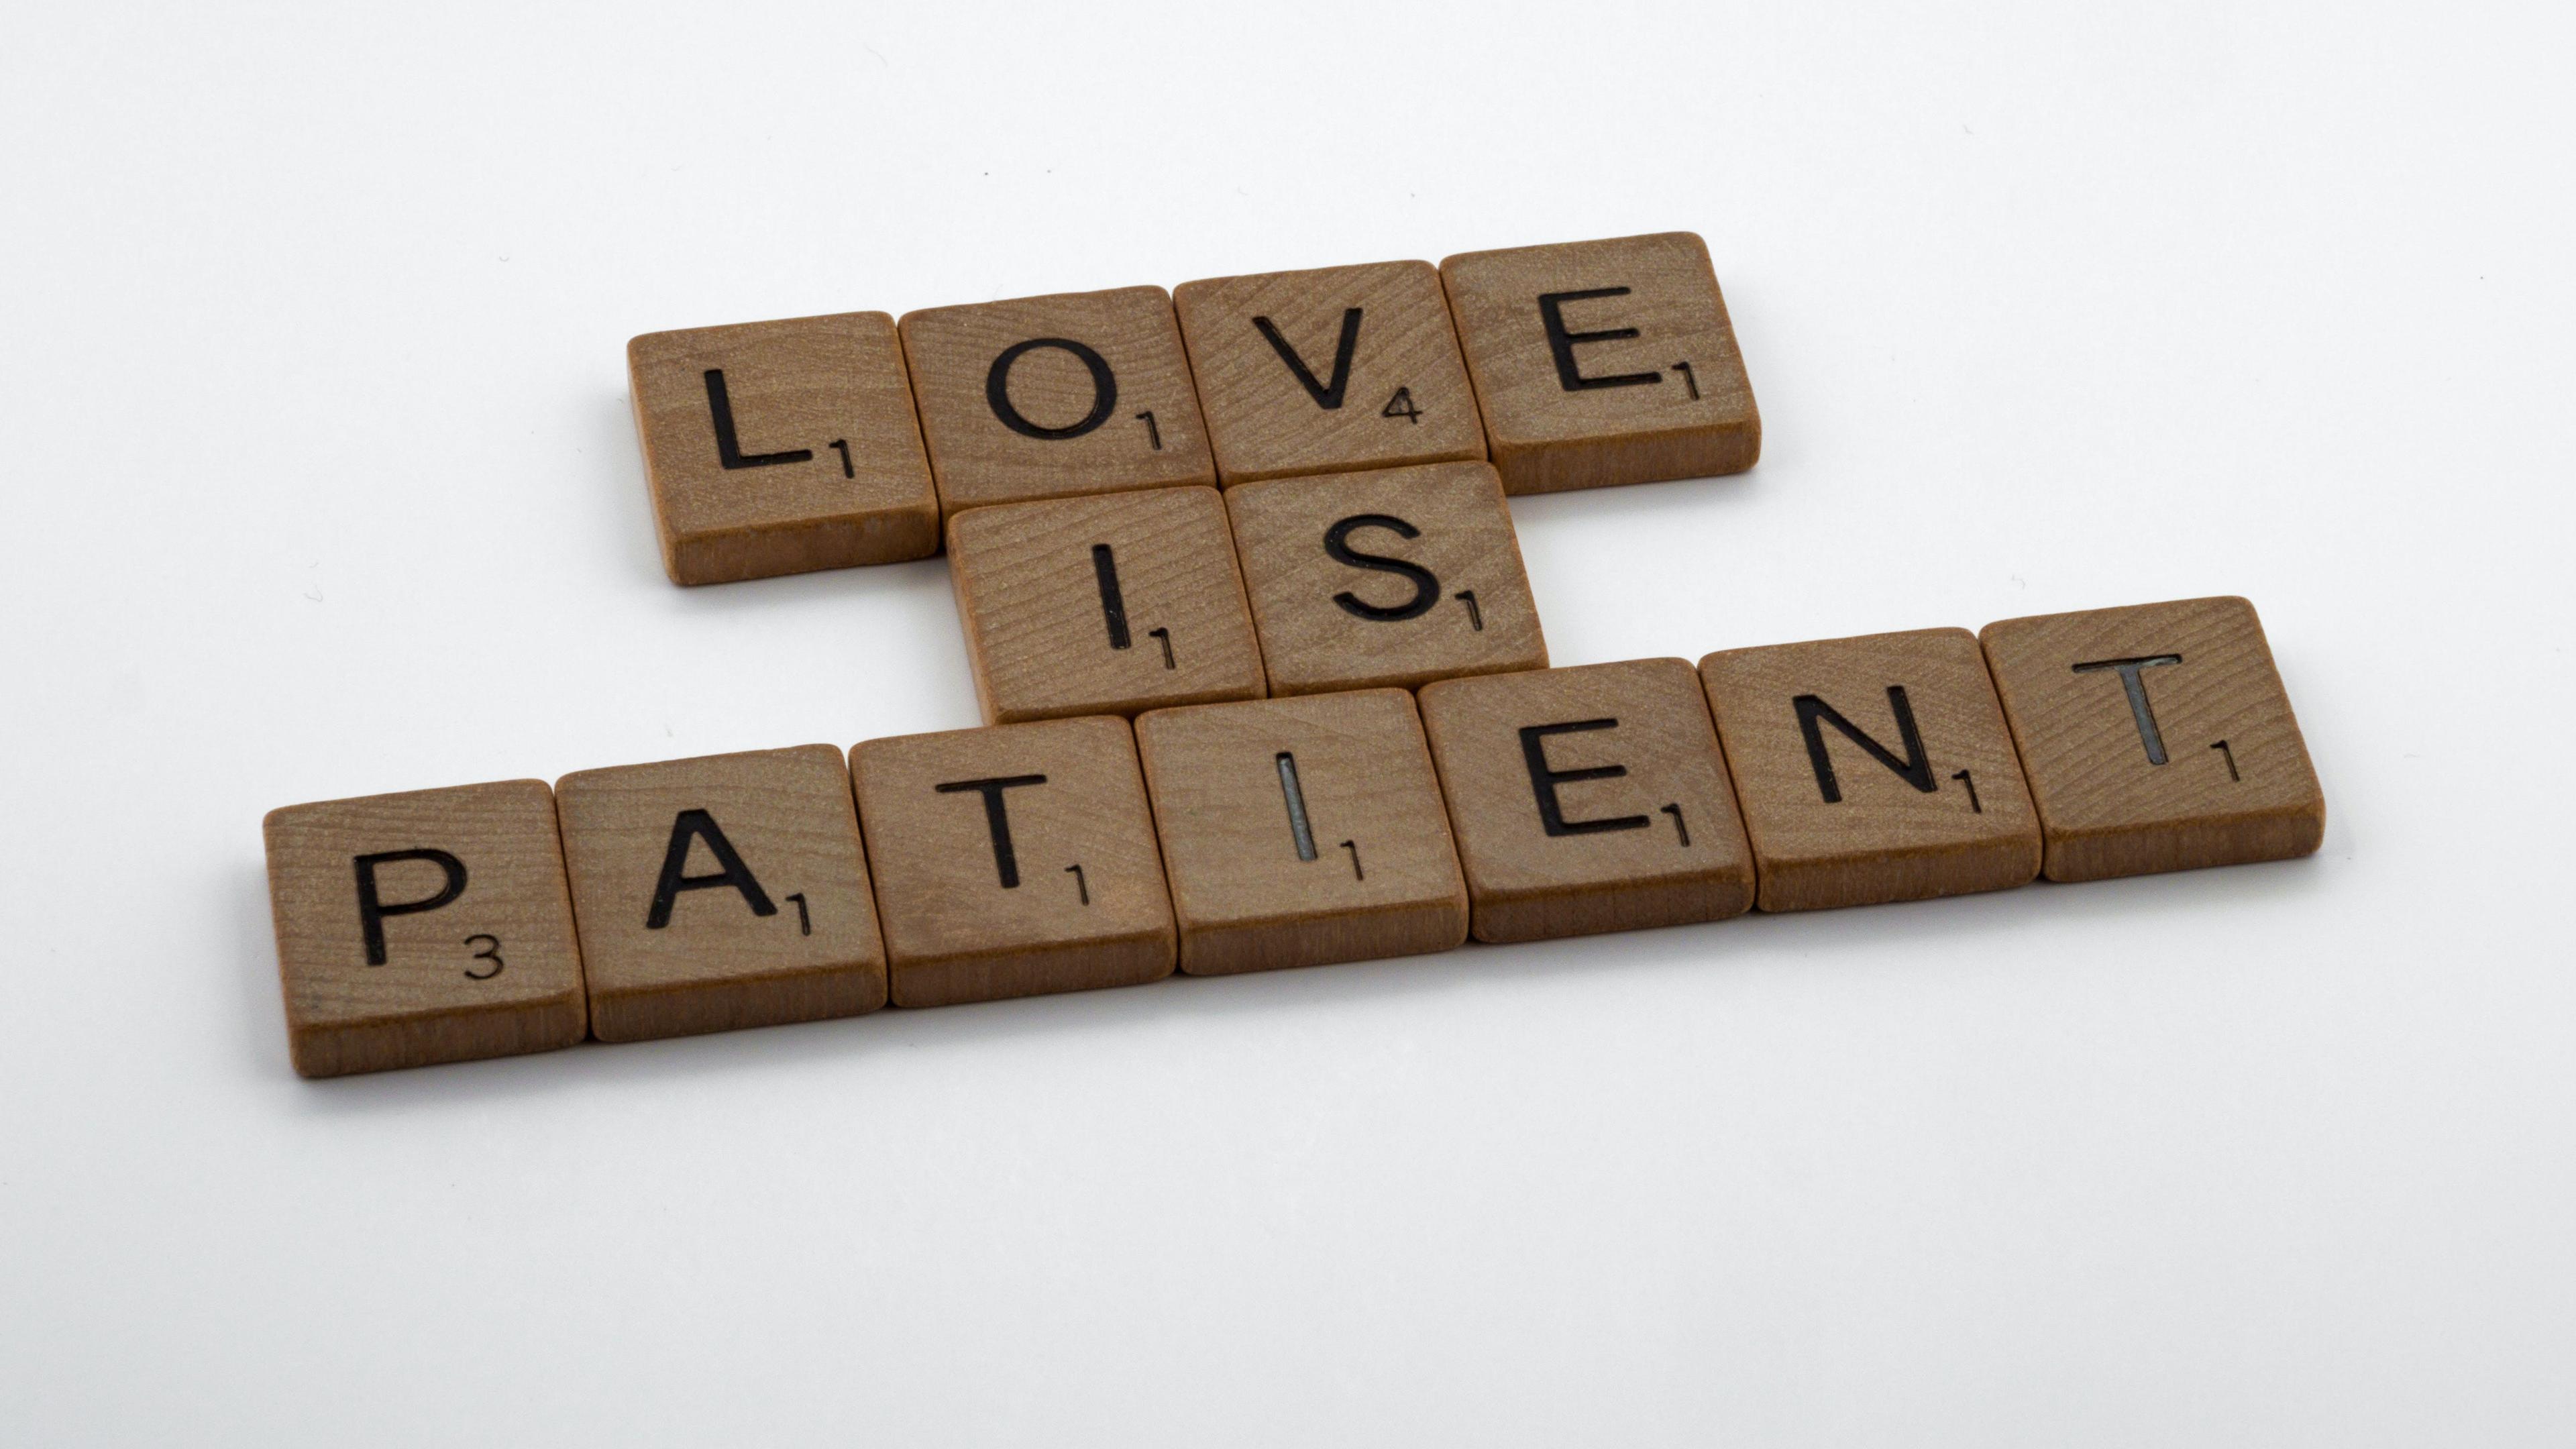 Love is patient, love is kind.